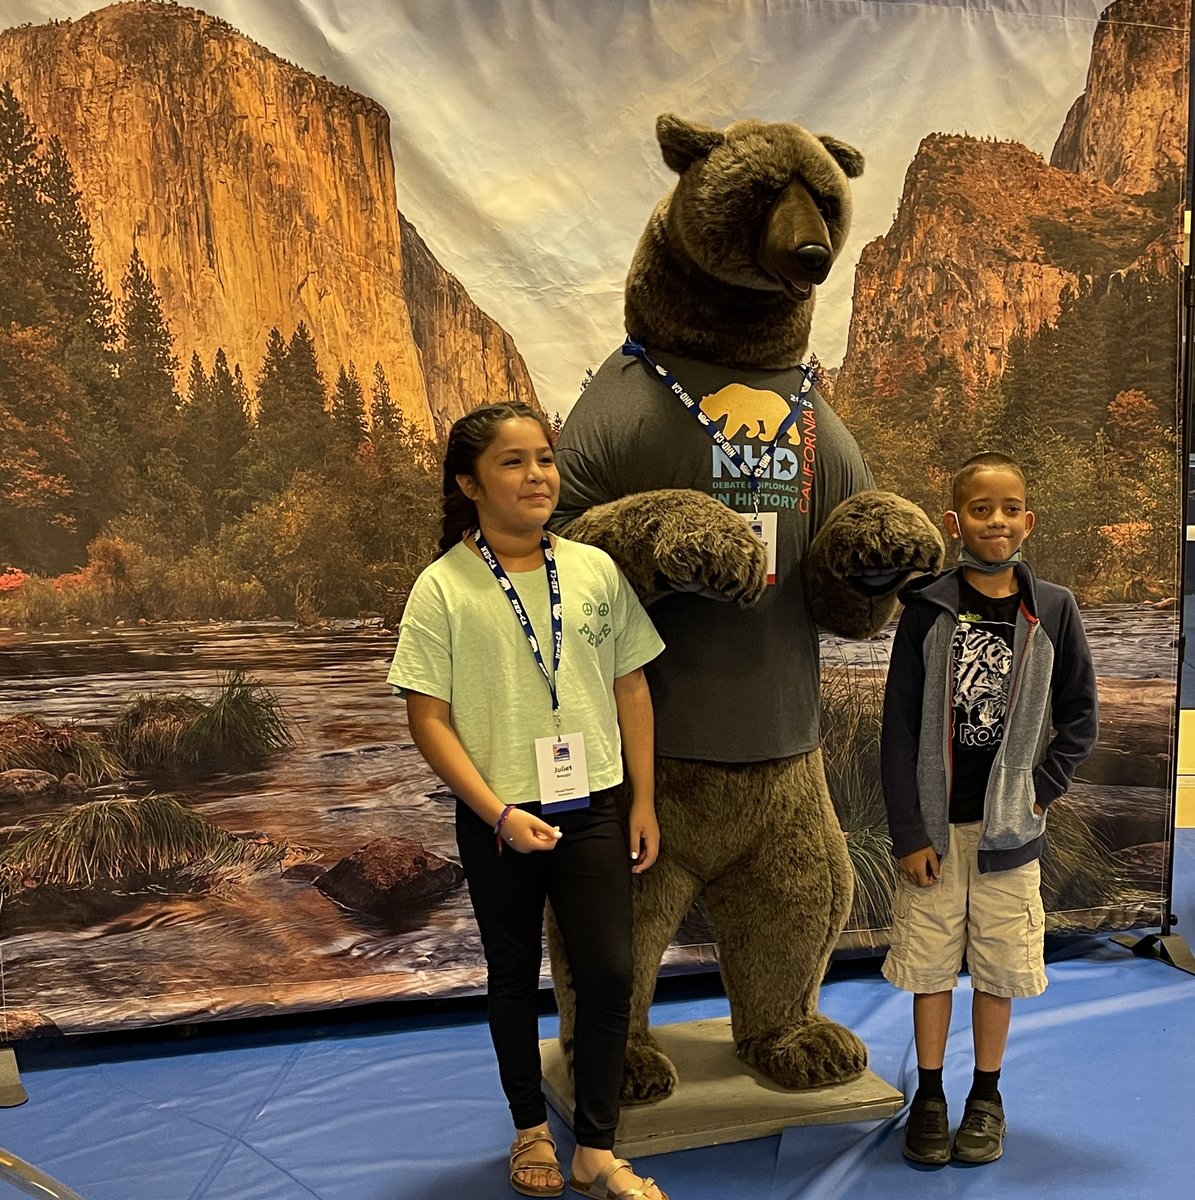 CES cubbie bears with @NHDCA’s bear Yosemite. Always a fun experience at the CA State History Day event. @cuca_principal @CucamongaSD @chaix_mike #CESrocks